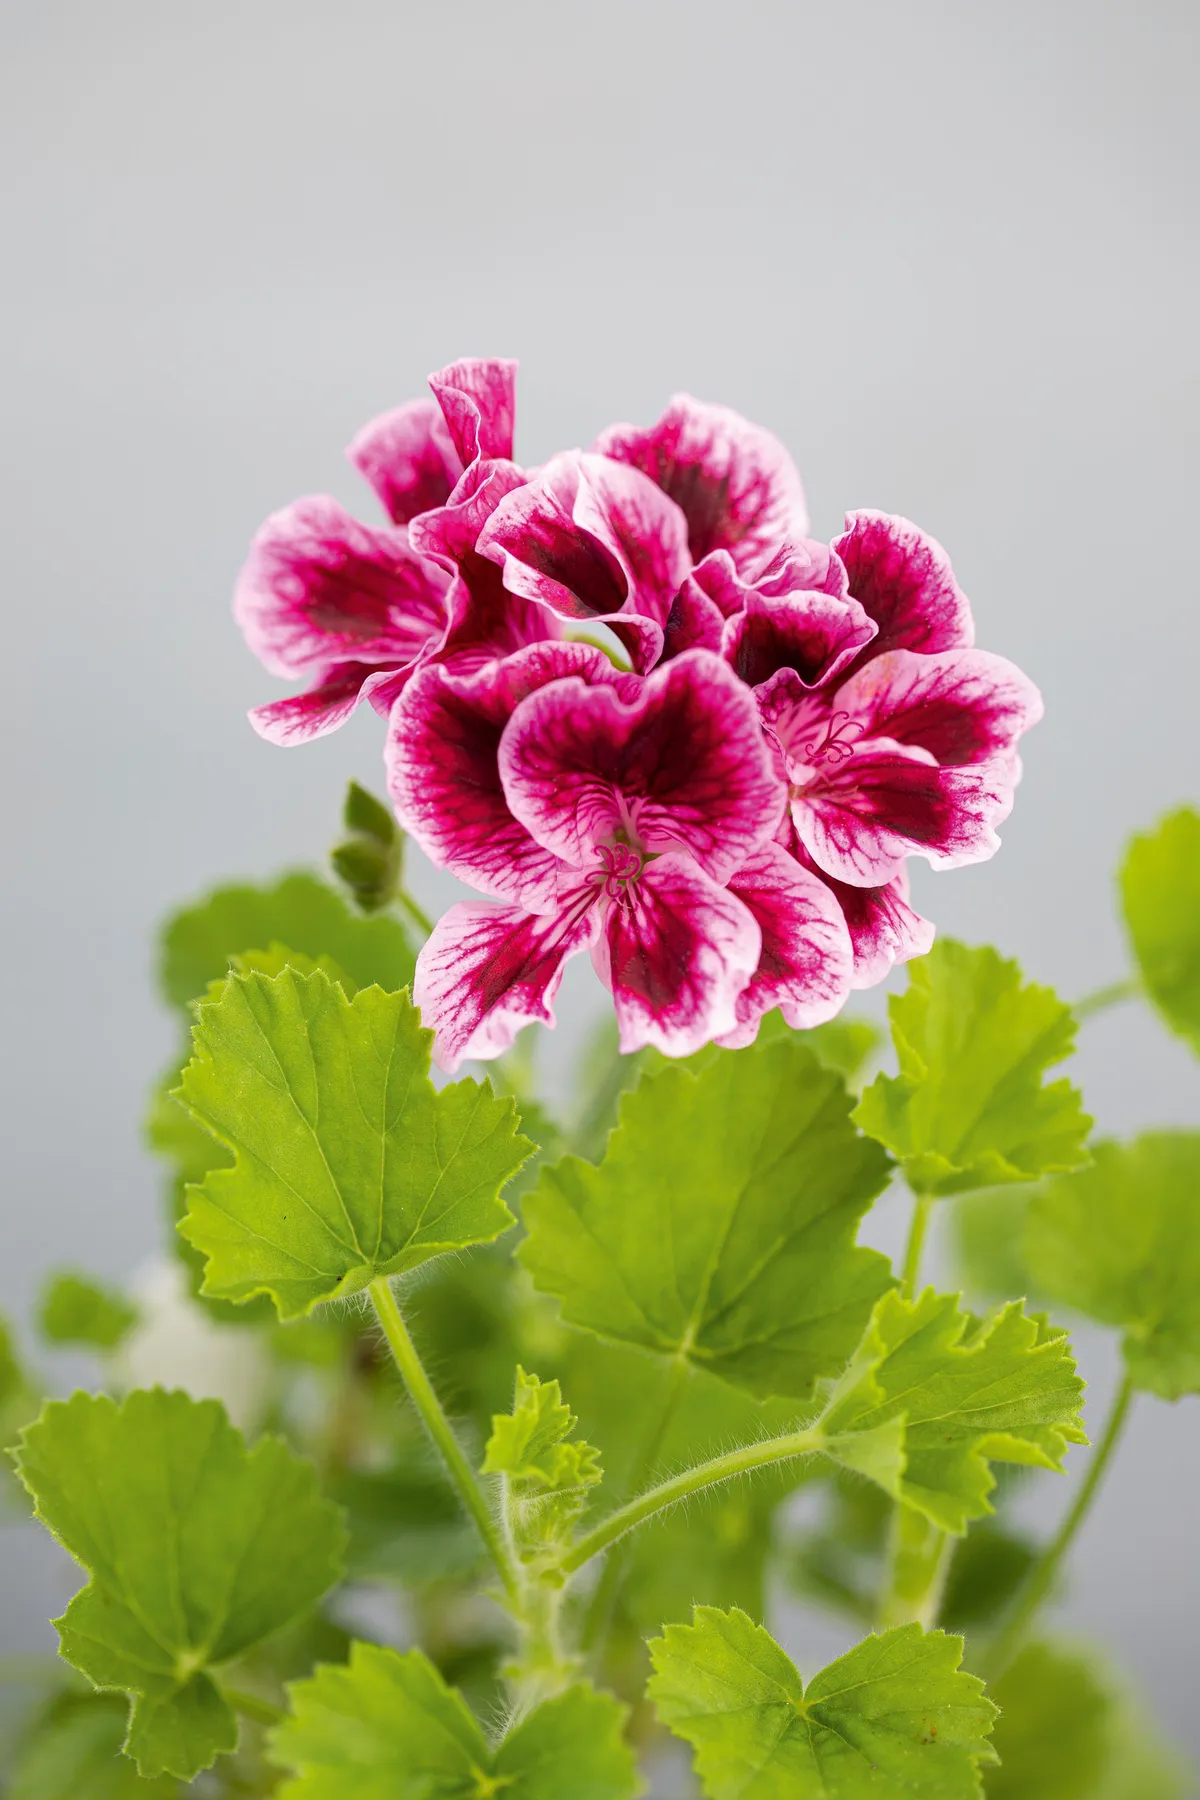 Pelargonium ‘Spanish Angel’. Compact and neatly shaped yet bushy, with strong markings and light feathering on the lower petals. The upper petals have bold burgundy markings. Its hirsute nature creates a distinctive aura around the plant. 30cm. AGM. RHS H1C, USDA 9b-13.